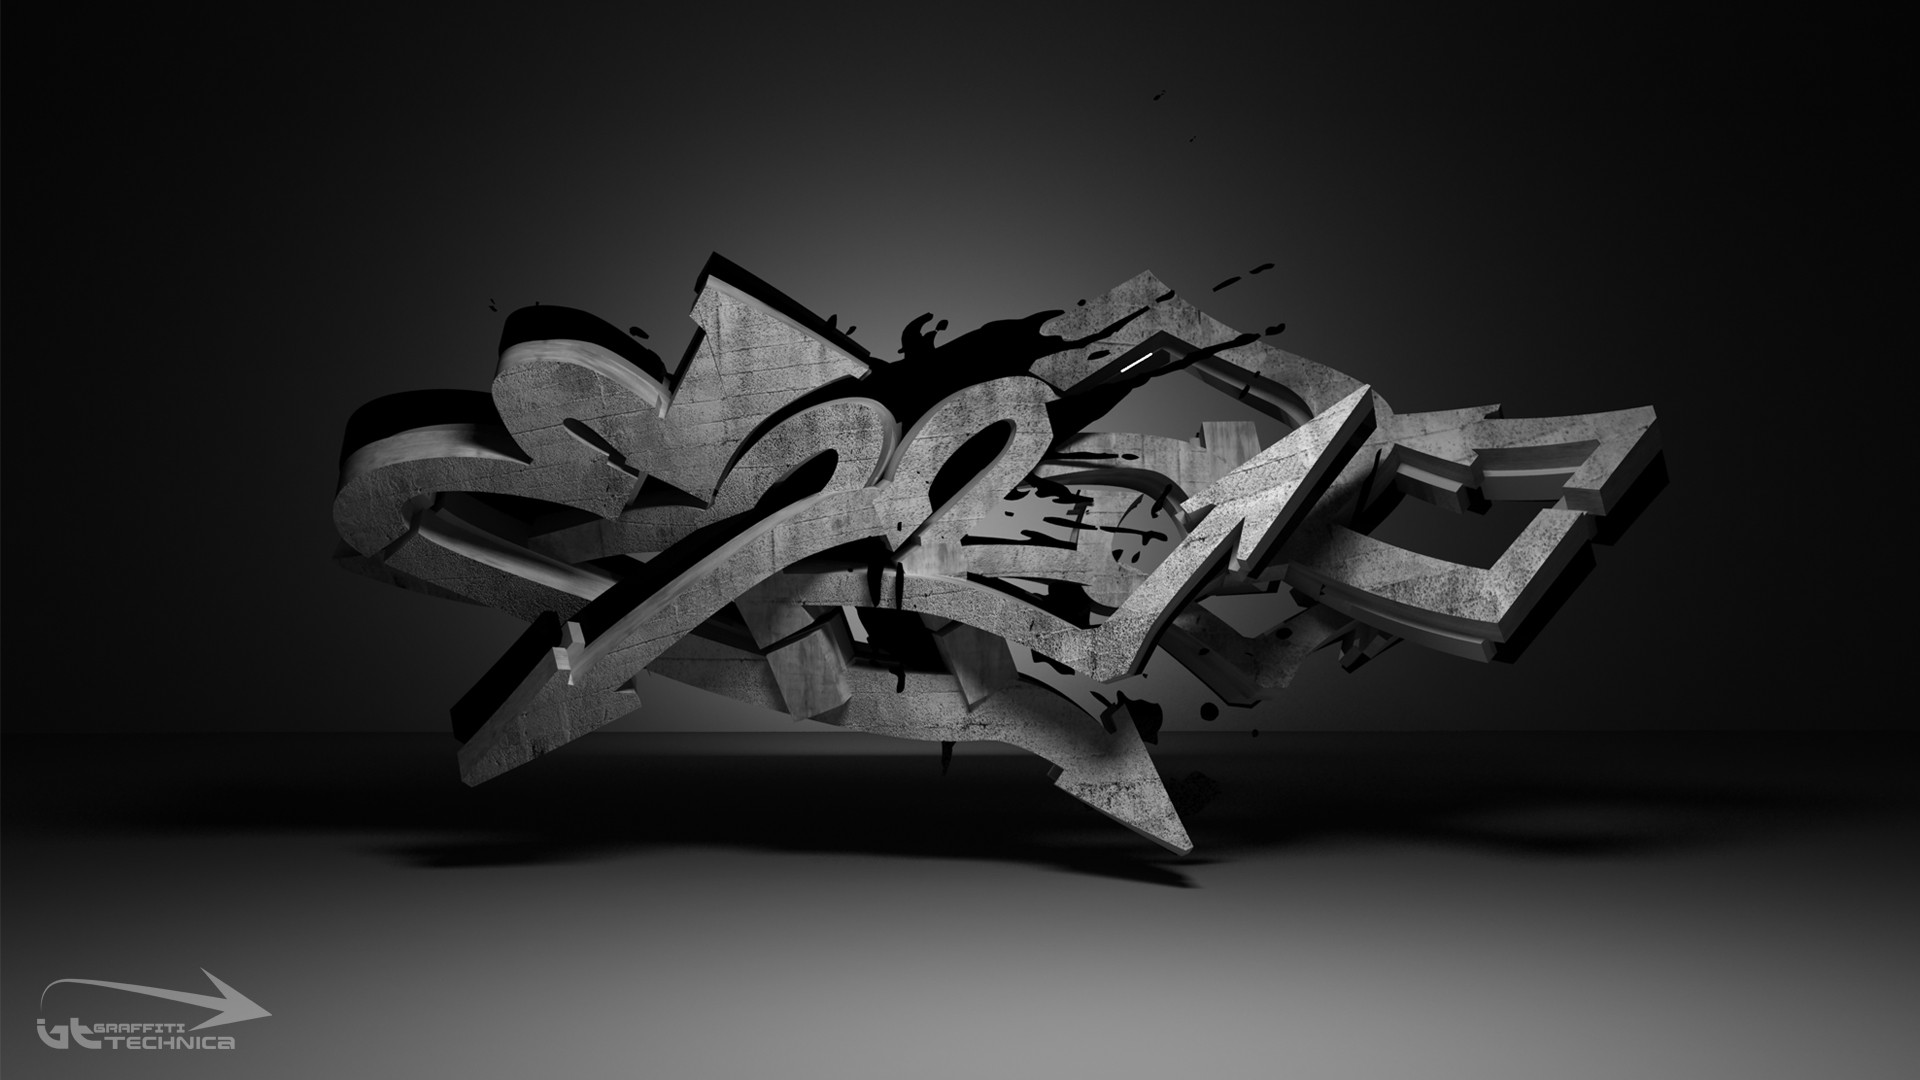 Graffiti Font HD Backgrounds with image resolution 1920x1080 pixel. You can make this wallpaper for your Desktop Computer Backgrounds, Mac Wallpapers, Android Lock screen or iPhone Screensavers